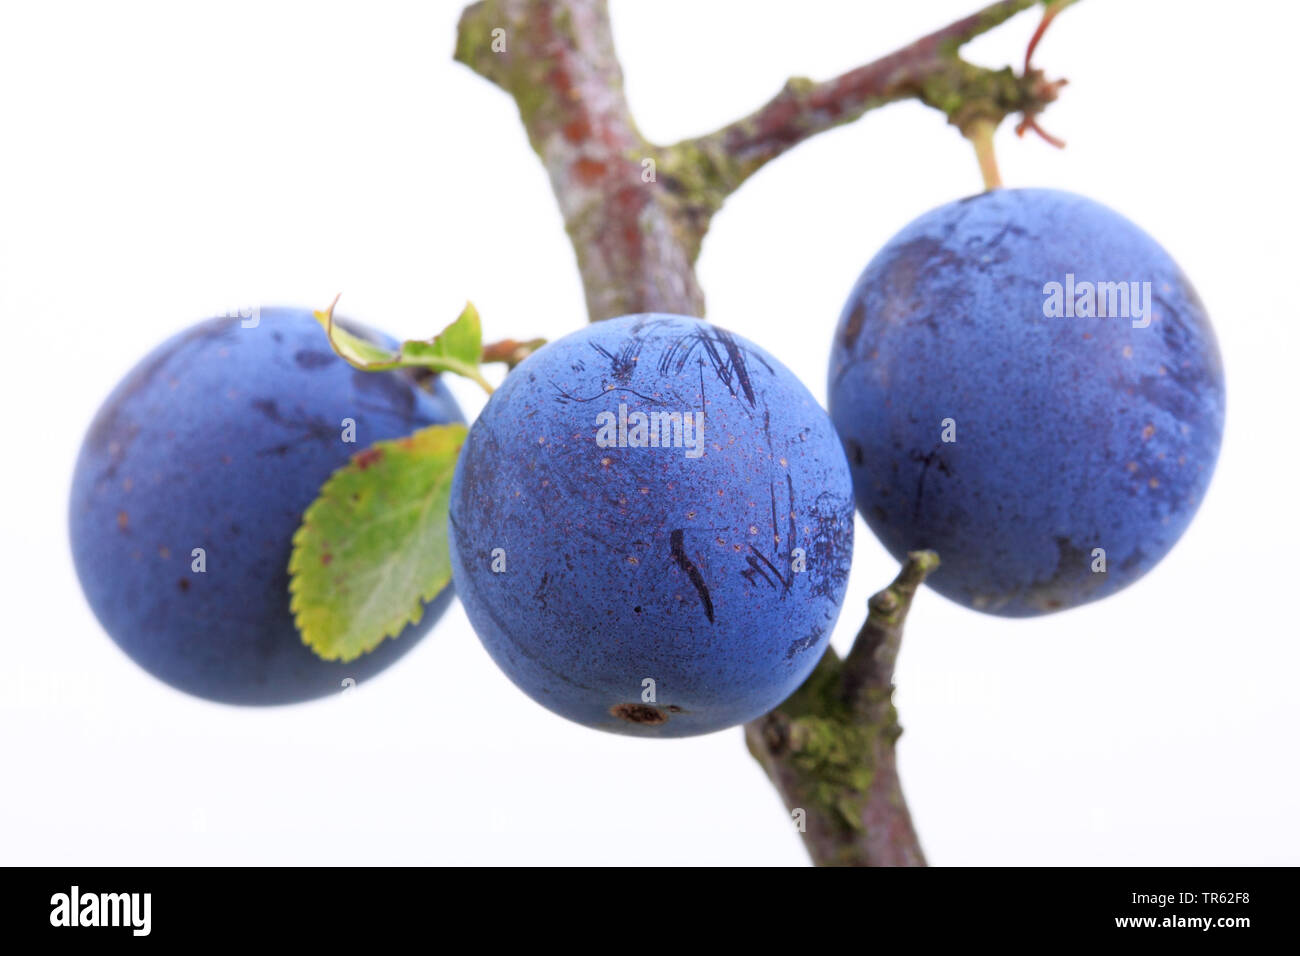 blackthorn, sloe (Prunus spinosa), fruits on a branch, cutout Stock Photo